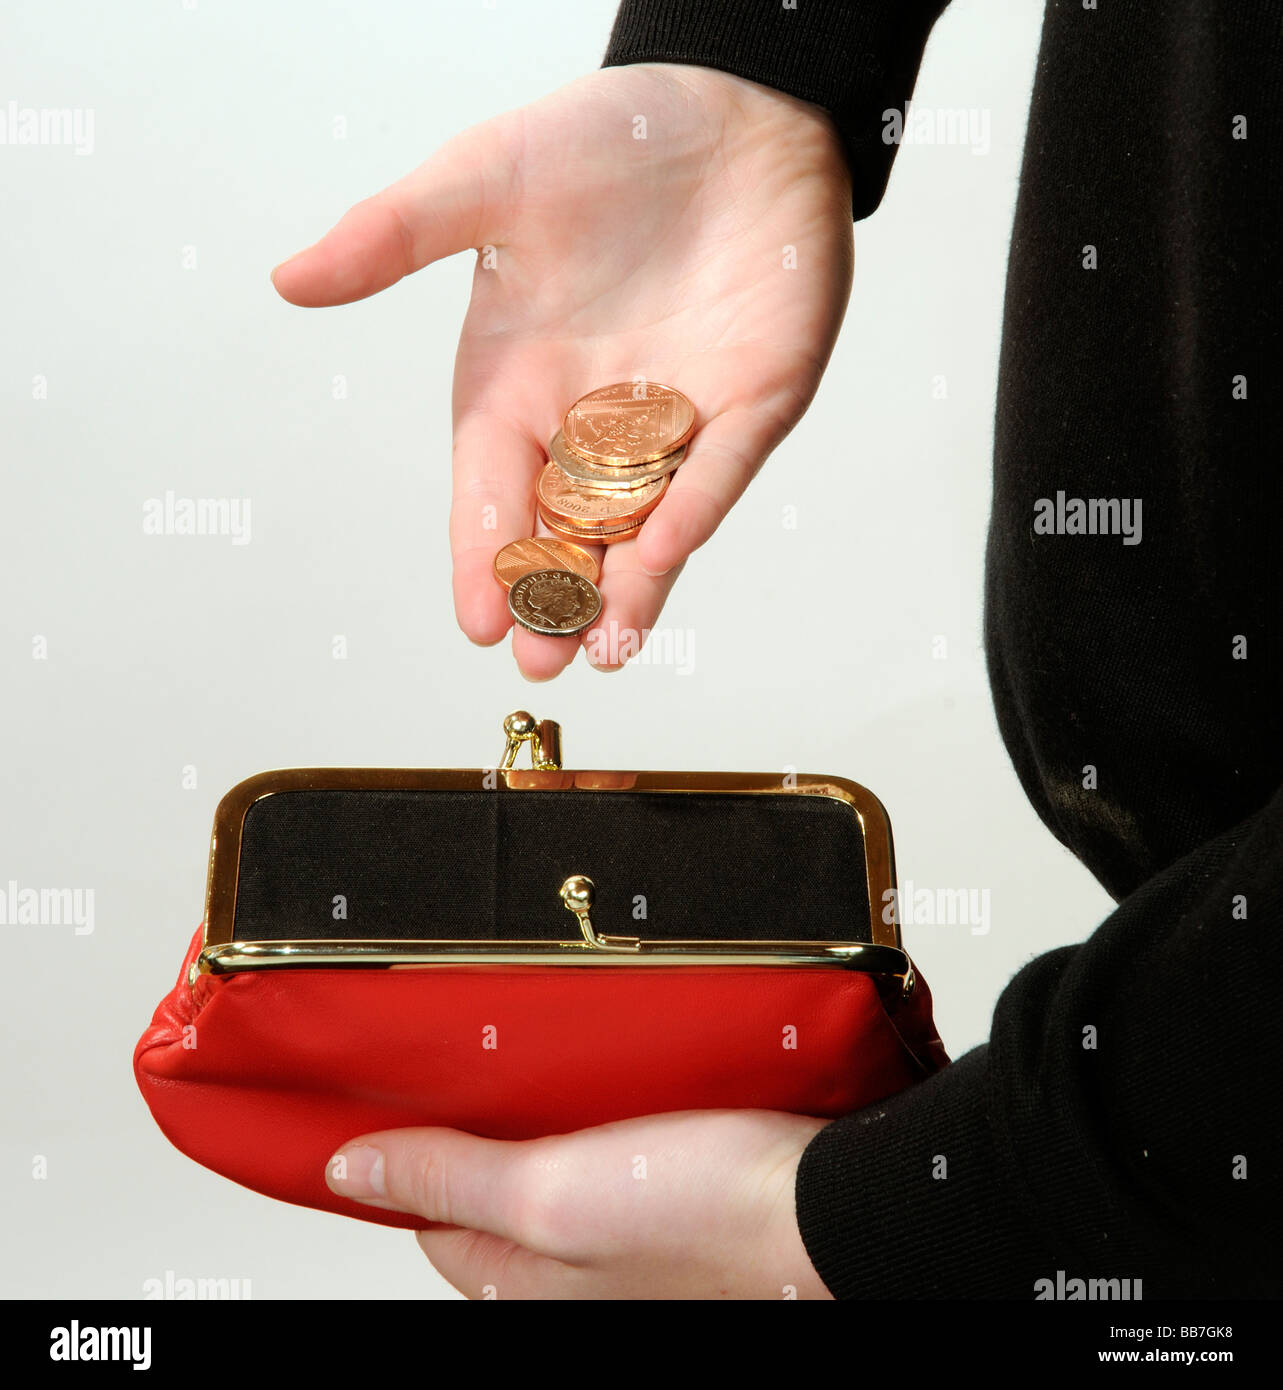 Child putting cash into a red purse One penny and two pence pieces Stock Photo